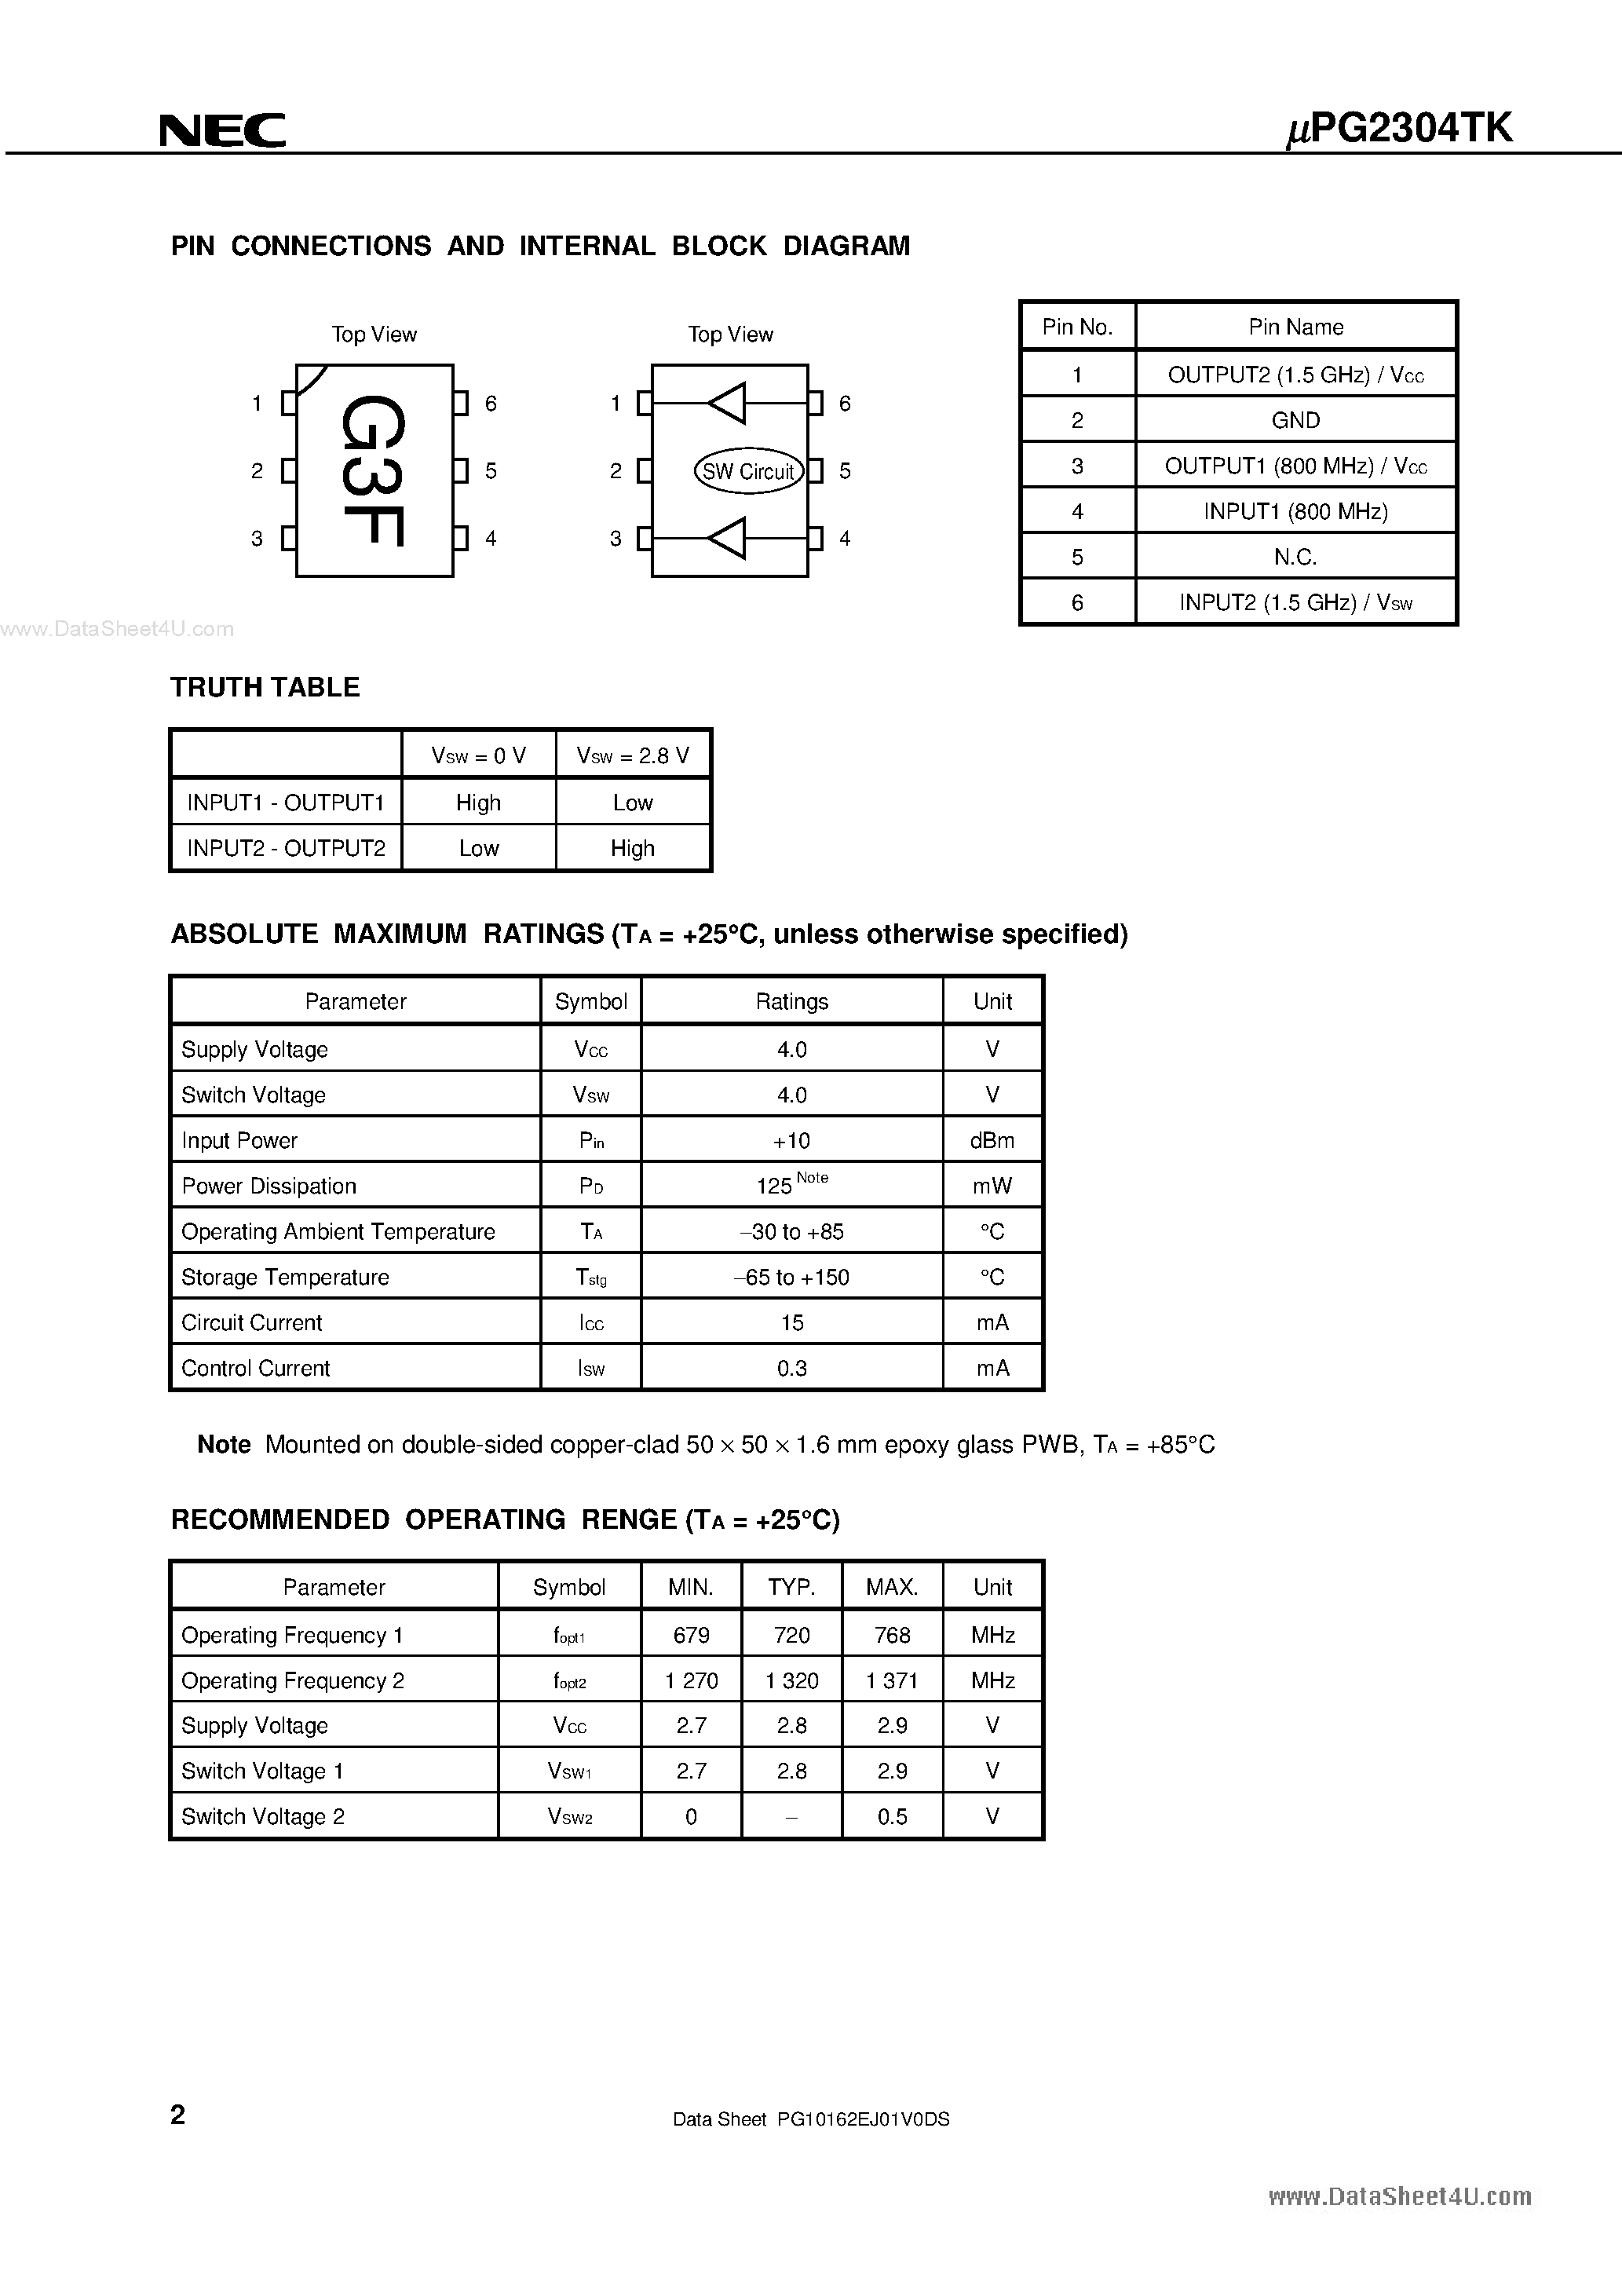 Datasheet UPG2304TK - L-BAND VCO LOCAL BUFFER AMPLIFIER page 2